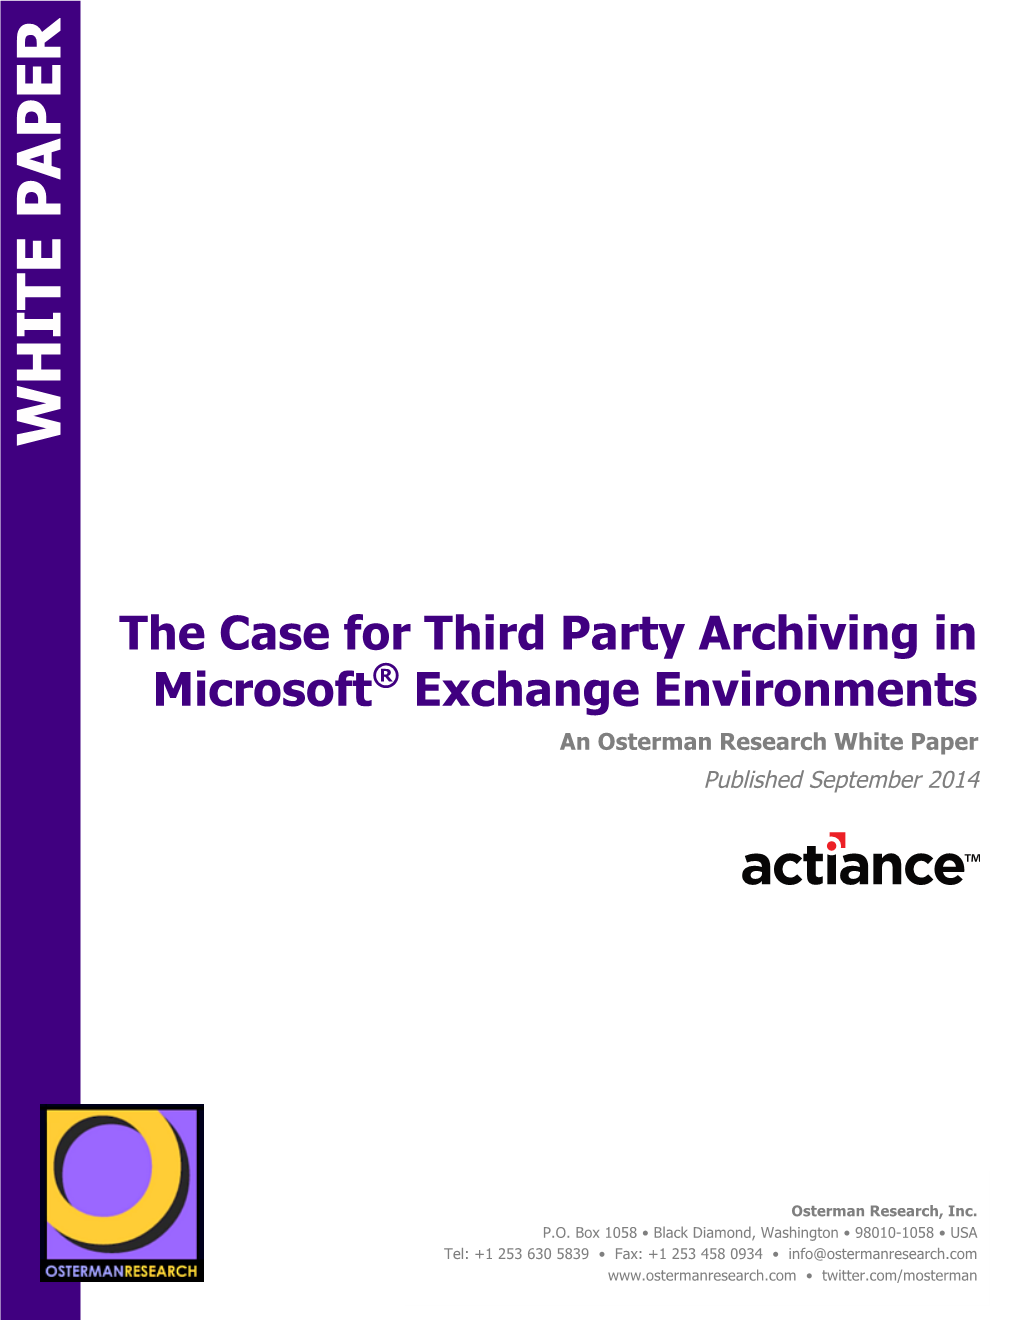 The Case for Third Party Archiving in Microsoft Exchange